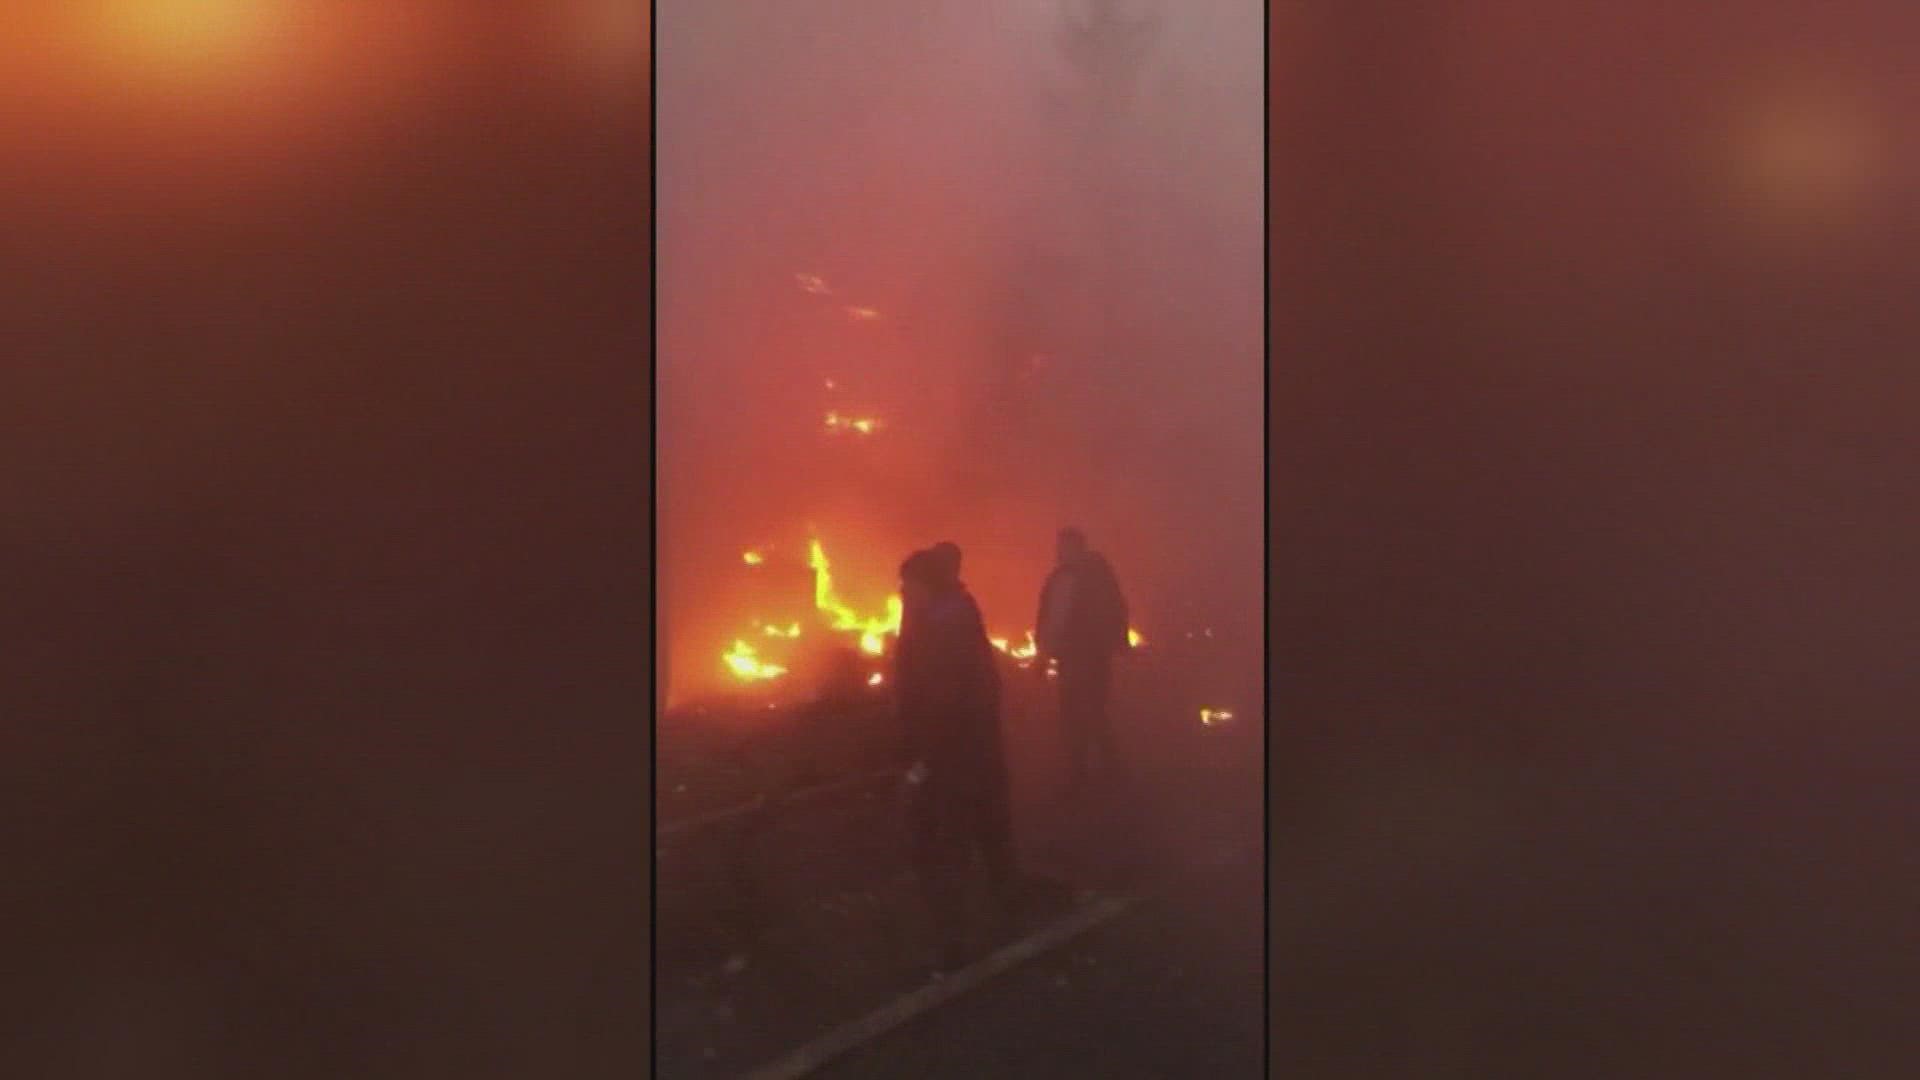 The helicopter crash killed at least 16 people, including Ukraine's interior minister.